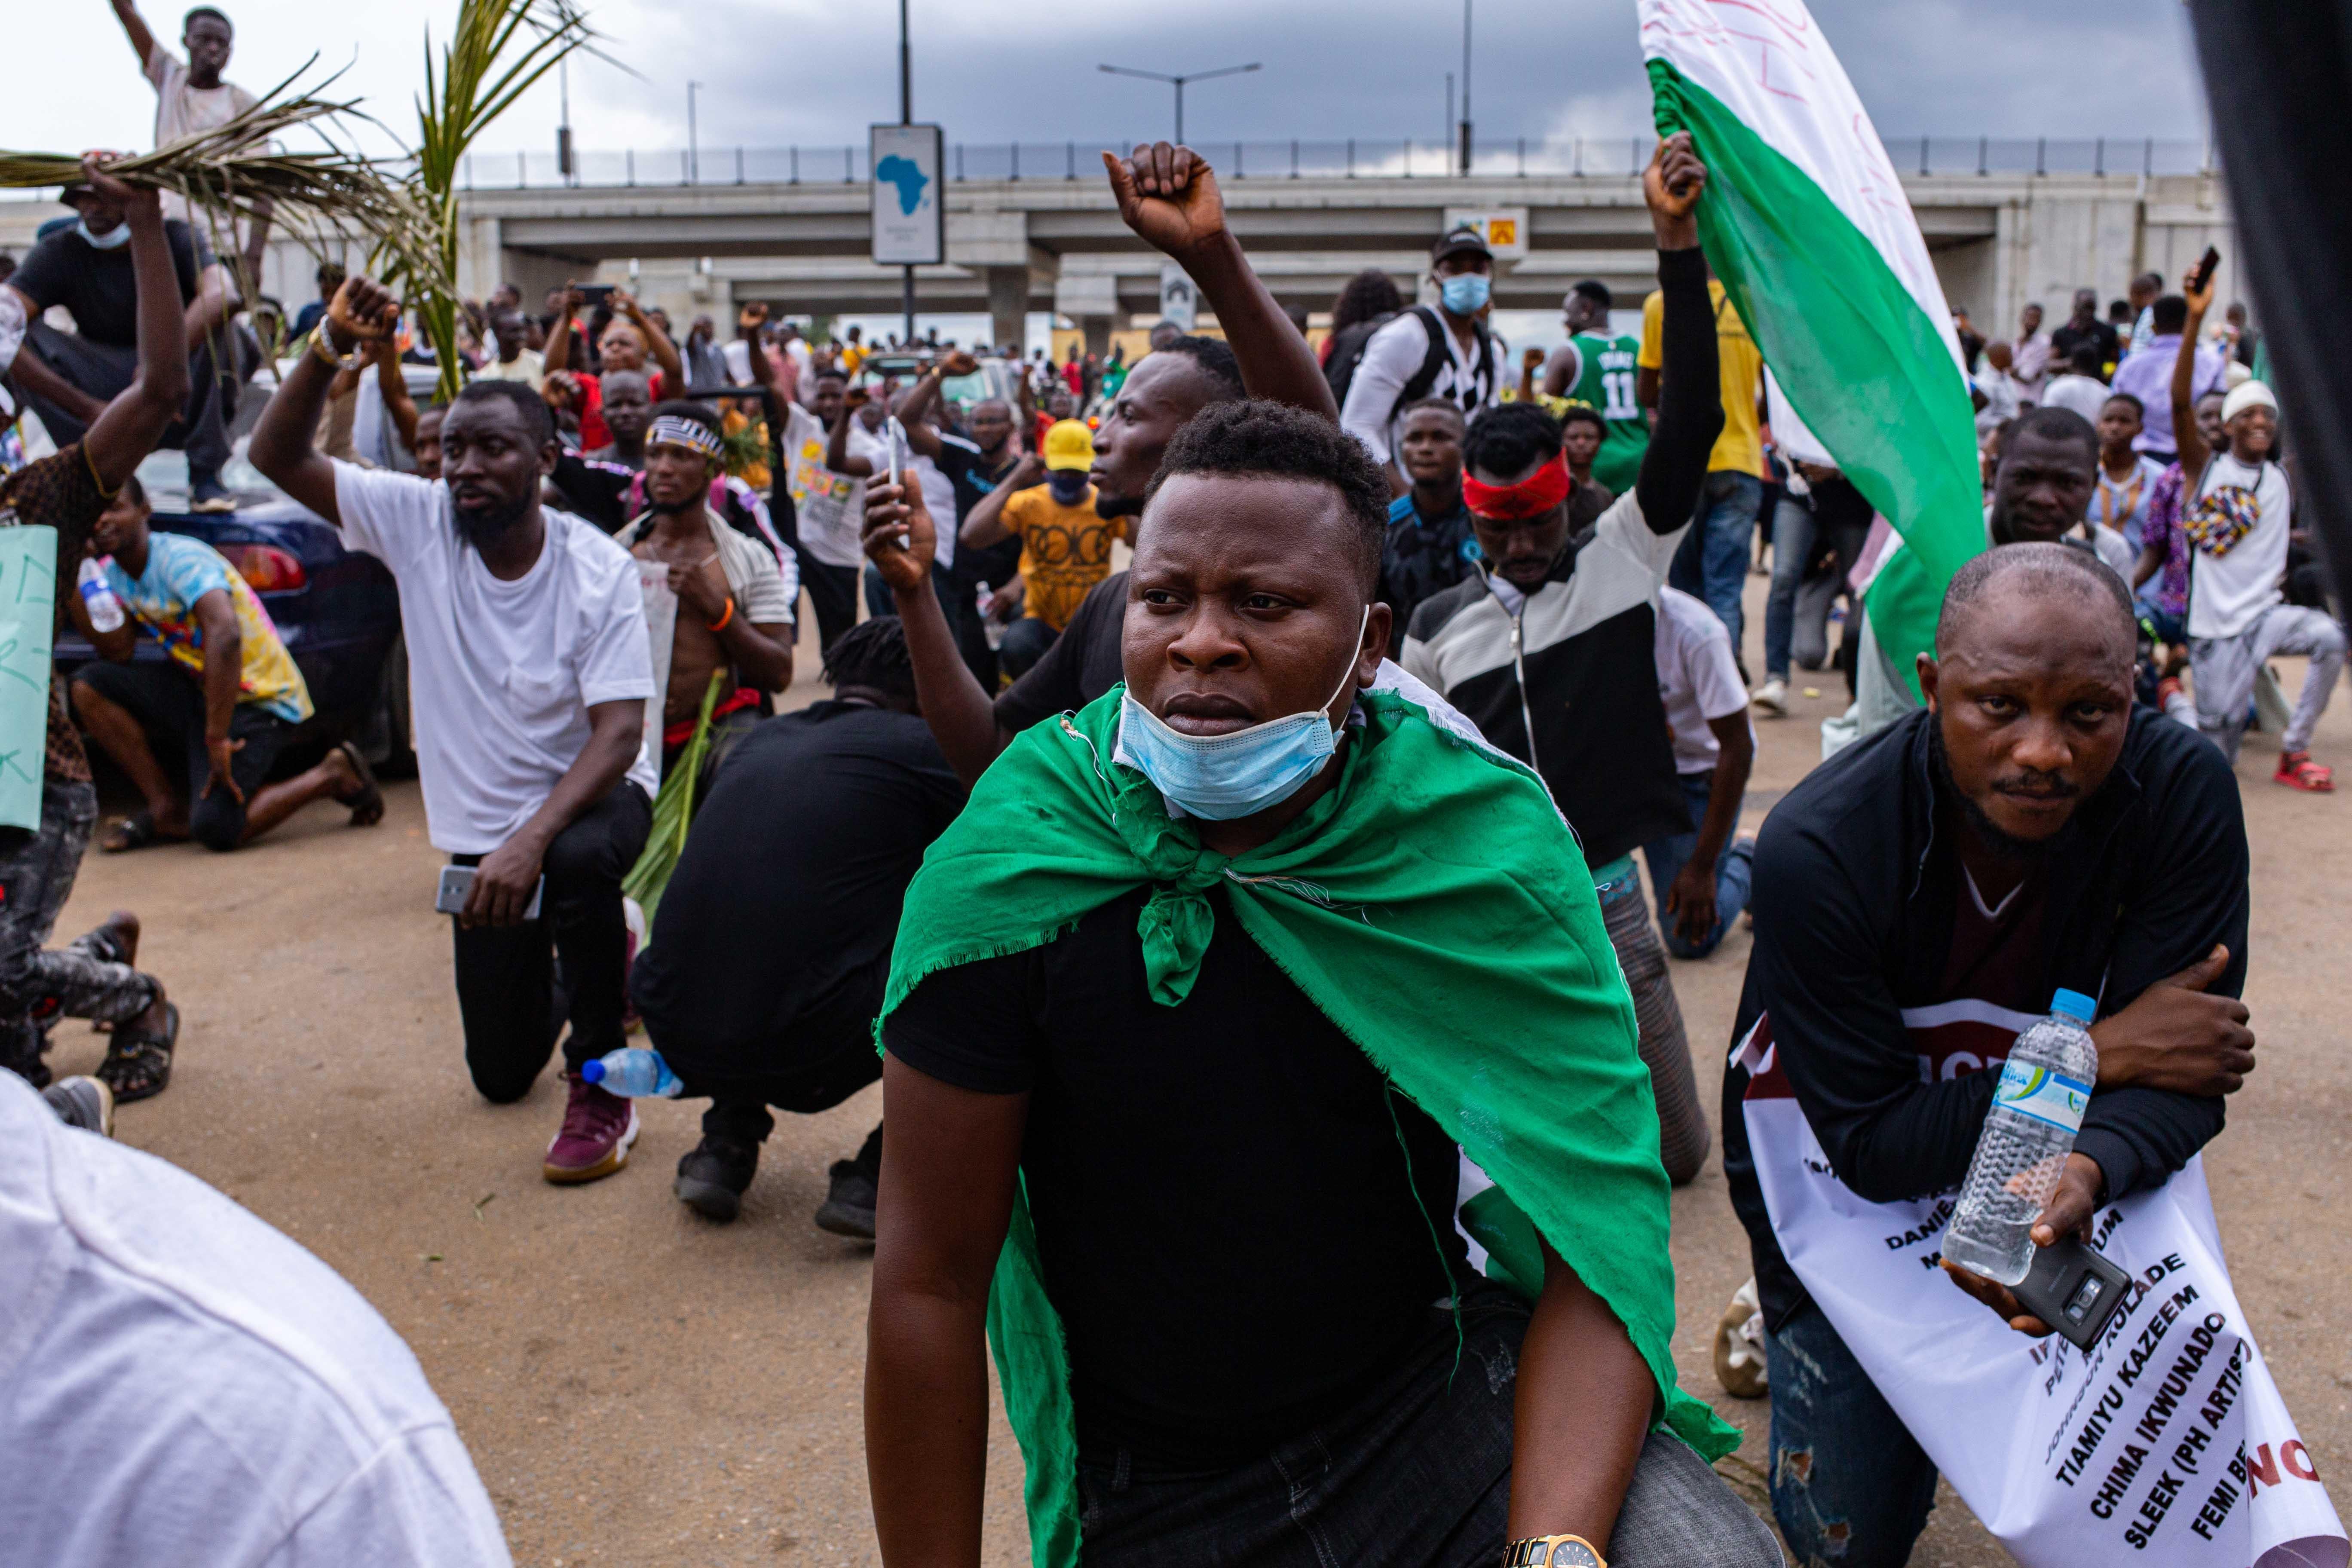 A man wearing a Nigerian flag and a face mask takes a knee while others raise their fists as a sign of protest. 